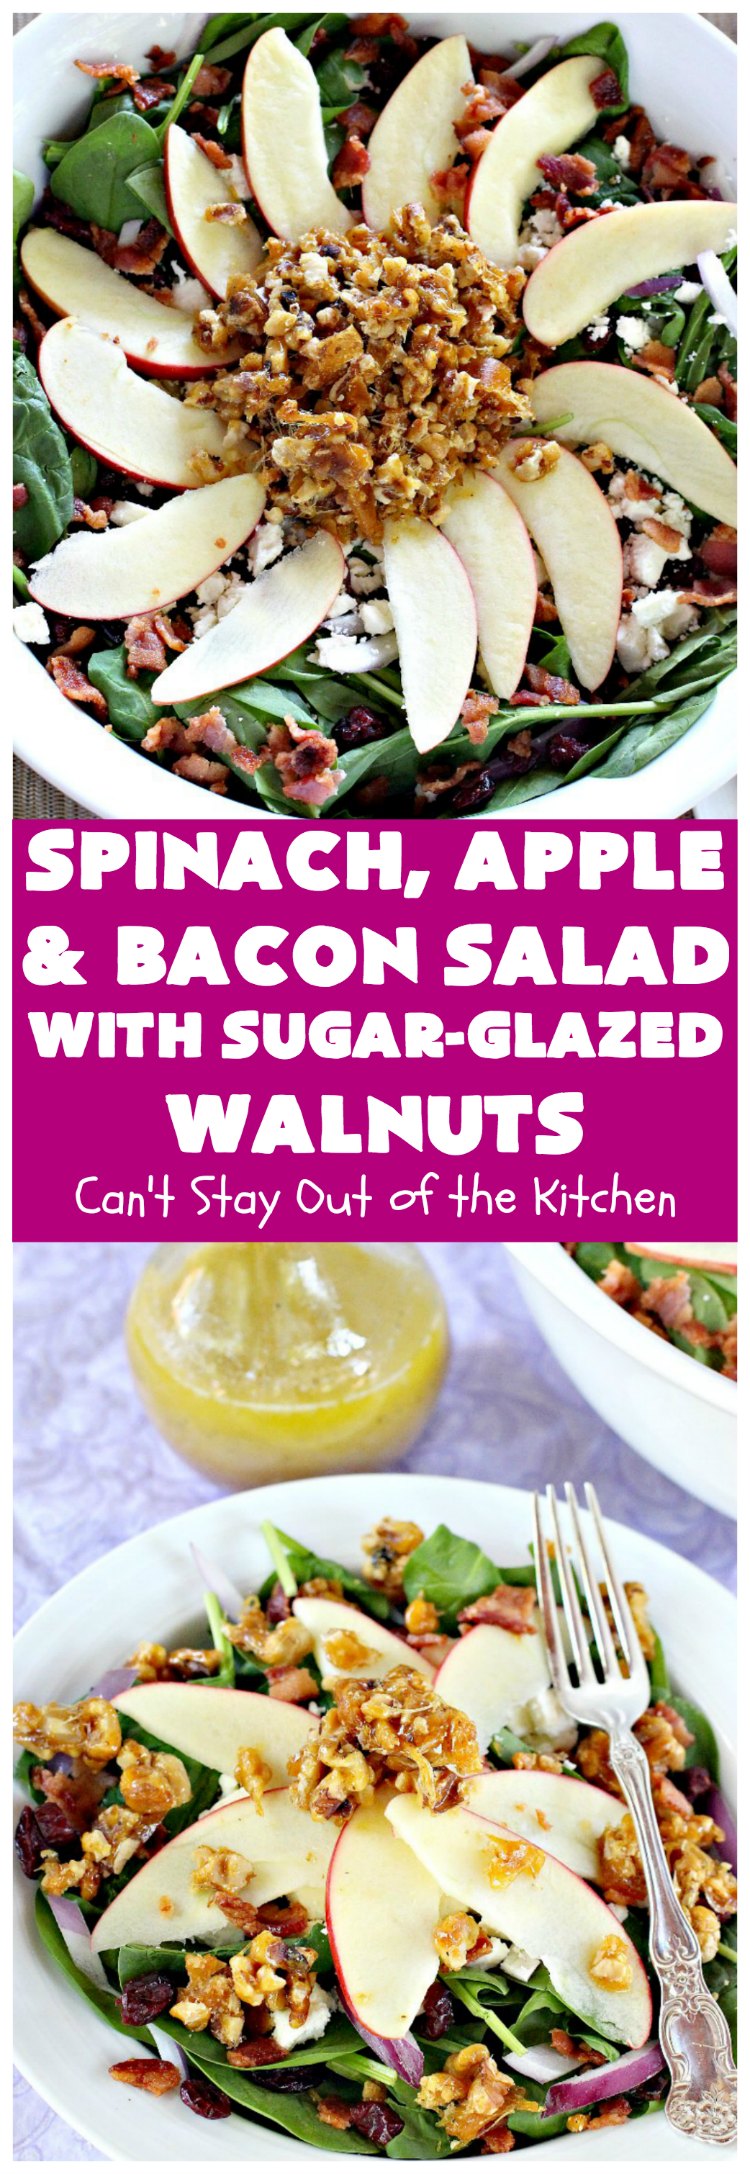 Spinach, Apple and Bacon Salad with Sugar-Glazed Walnuts | Can't Stay Out of the Kitchen